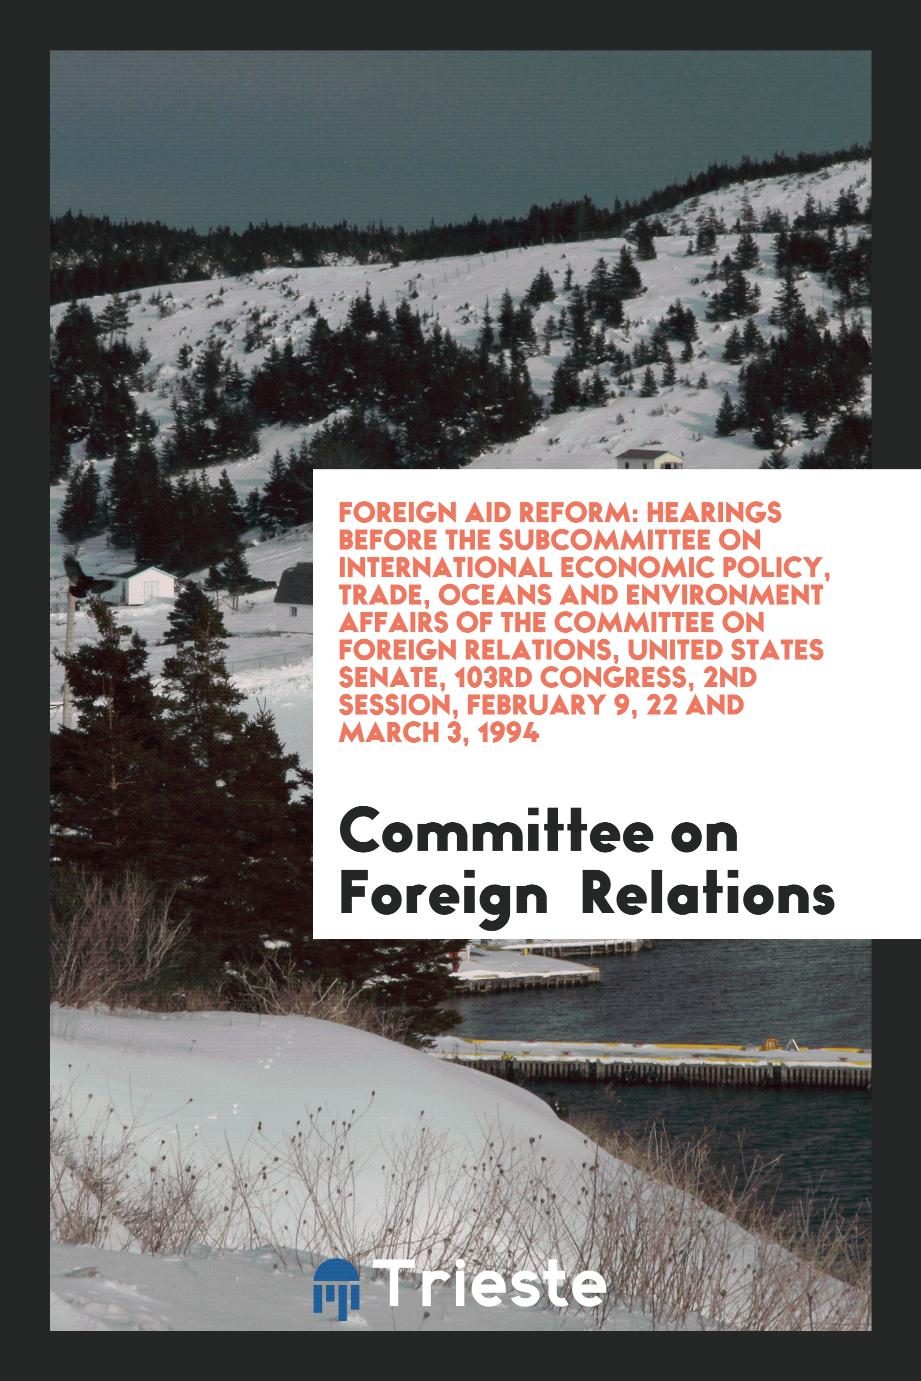 Foreign aid reform: hearings before the Subcommittee on International Economic Policy, Trade, Oceans and Environment Affairs of the Committee on Foreign Relations, United States Senate, 103rd Congress, 2nd session, February 9, 22 and March 3, 1994